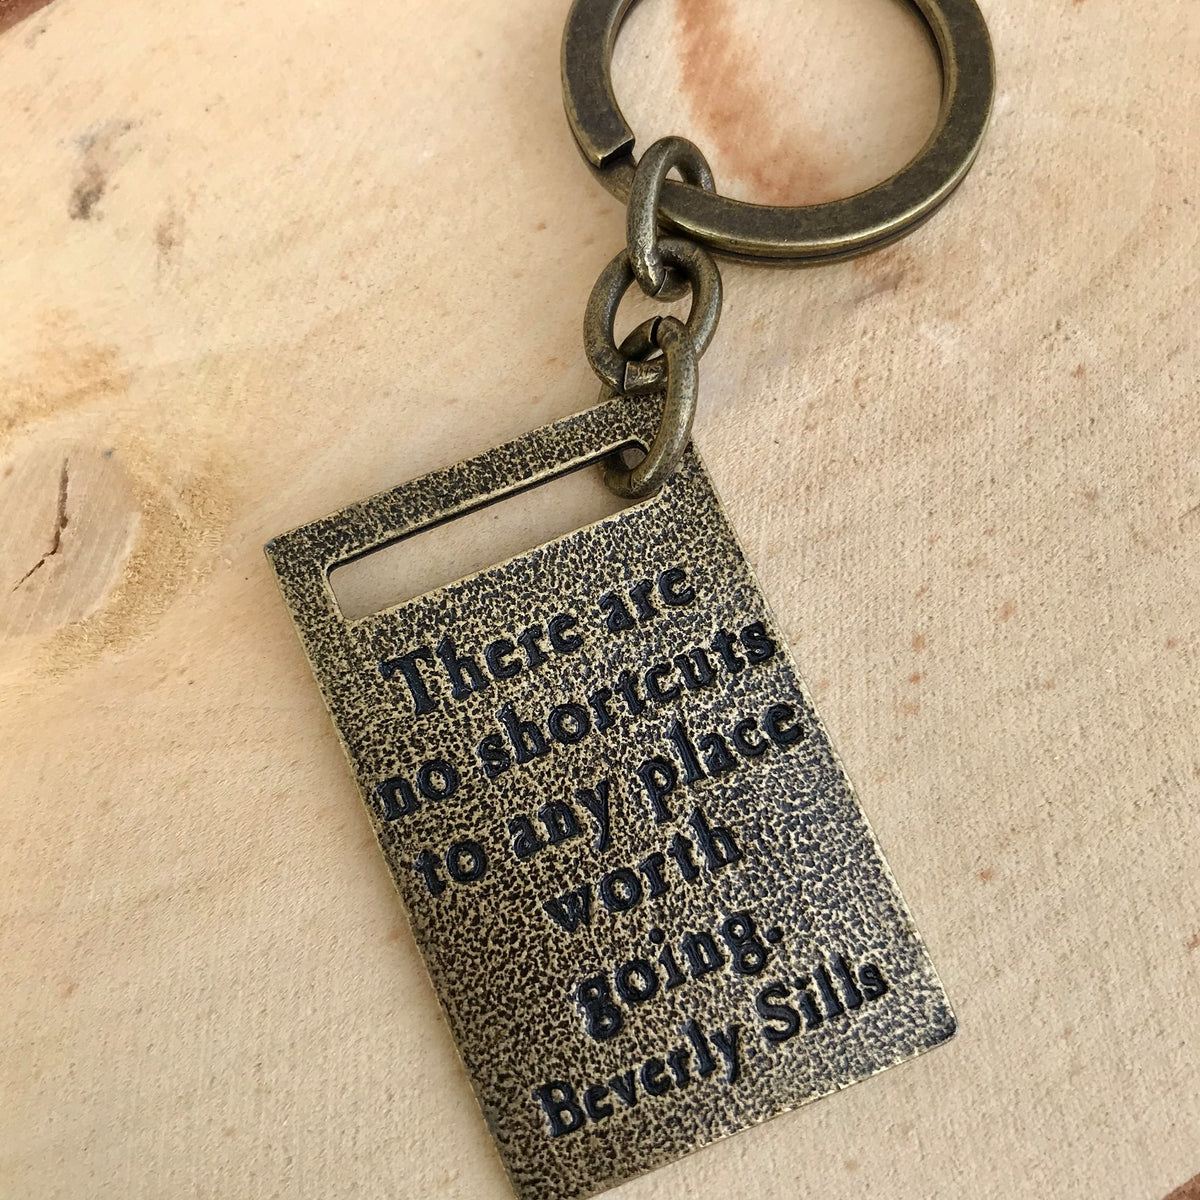 Antique brass finish keychain with the quote "There are no shortcuts to any place worth going."